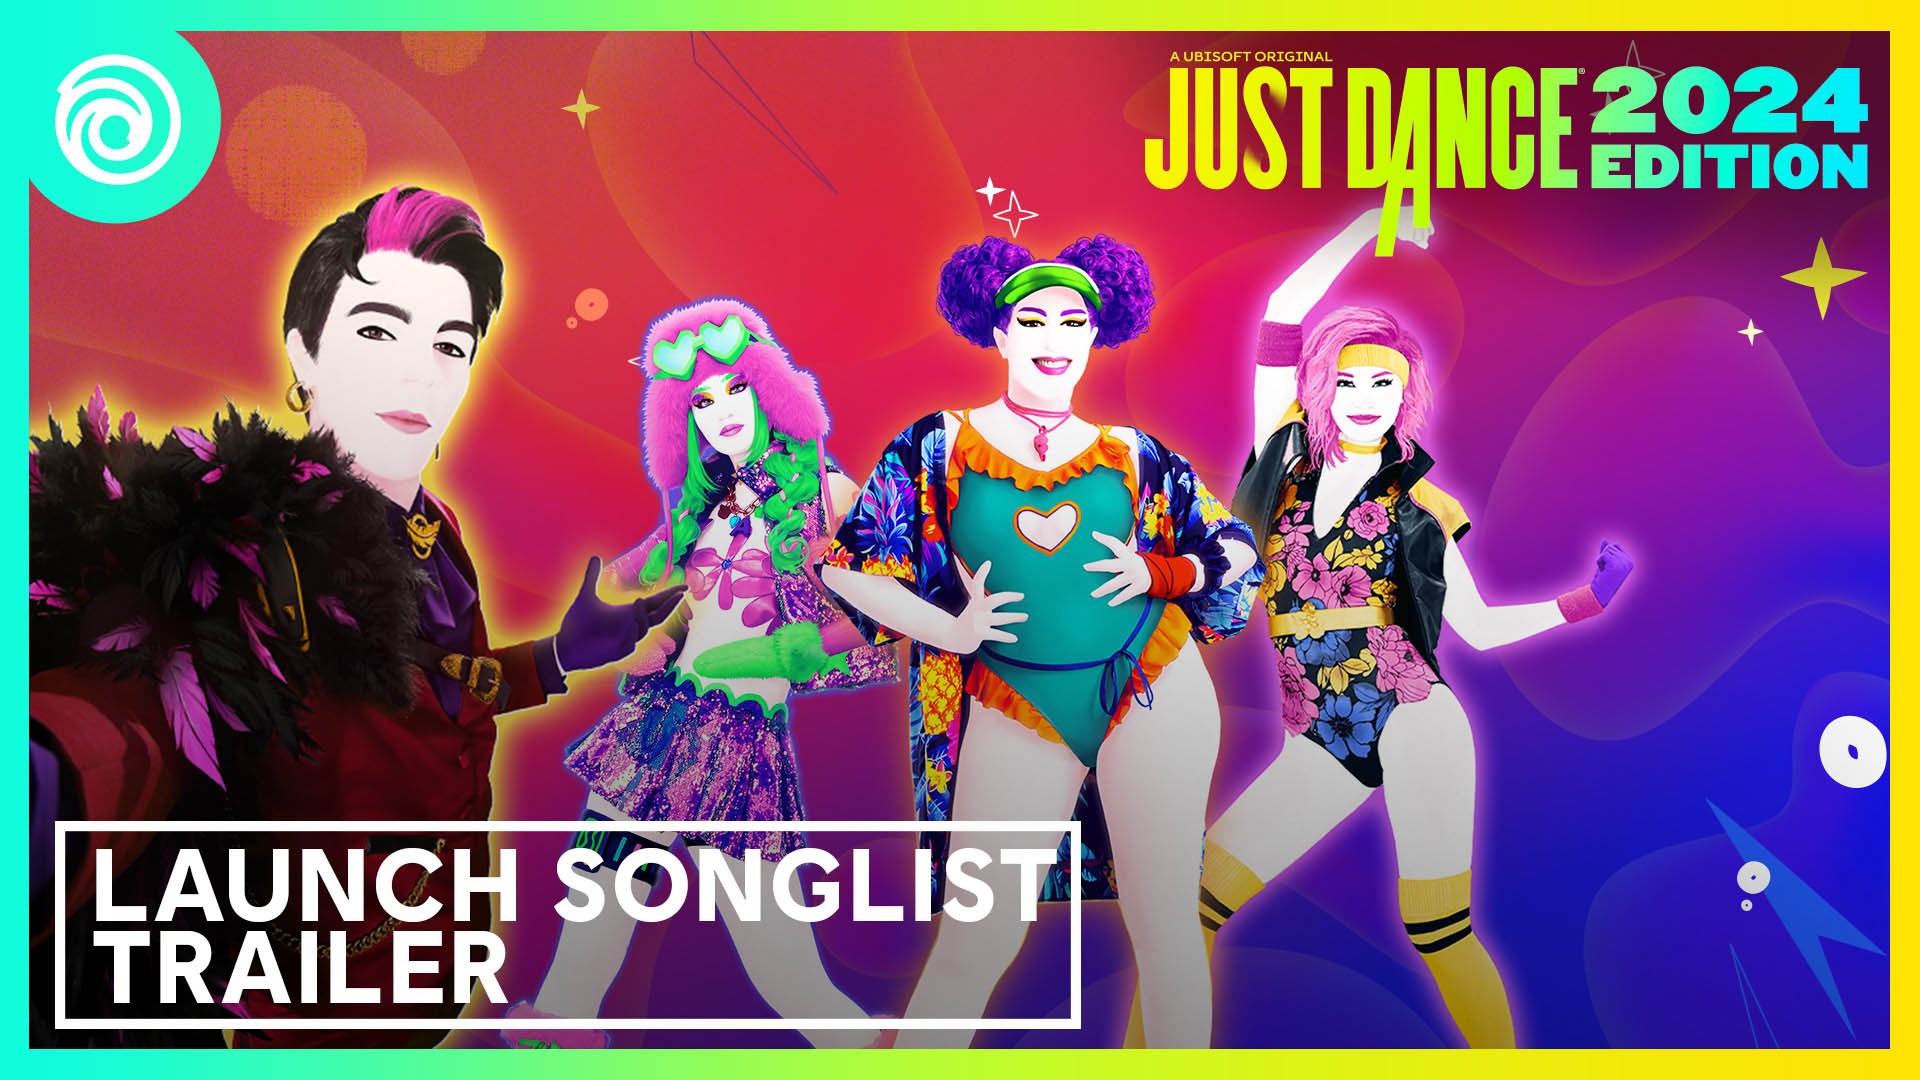 Just Dance 2024 Edition: Nintendo Switch™, PlayStation 5, Xbox Series X, S